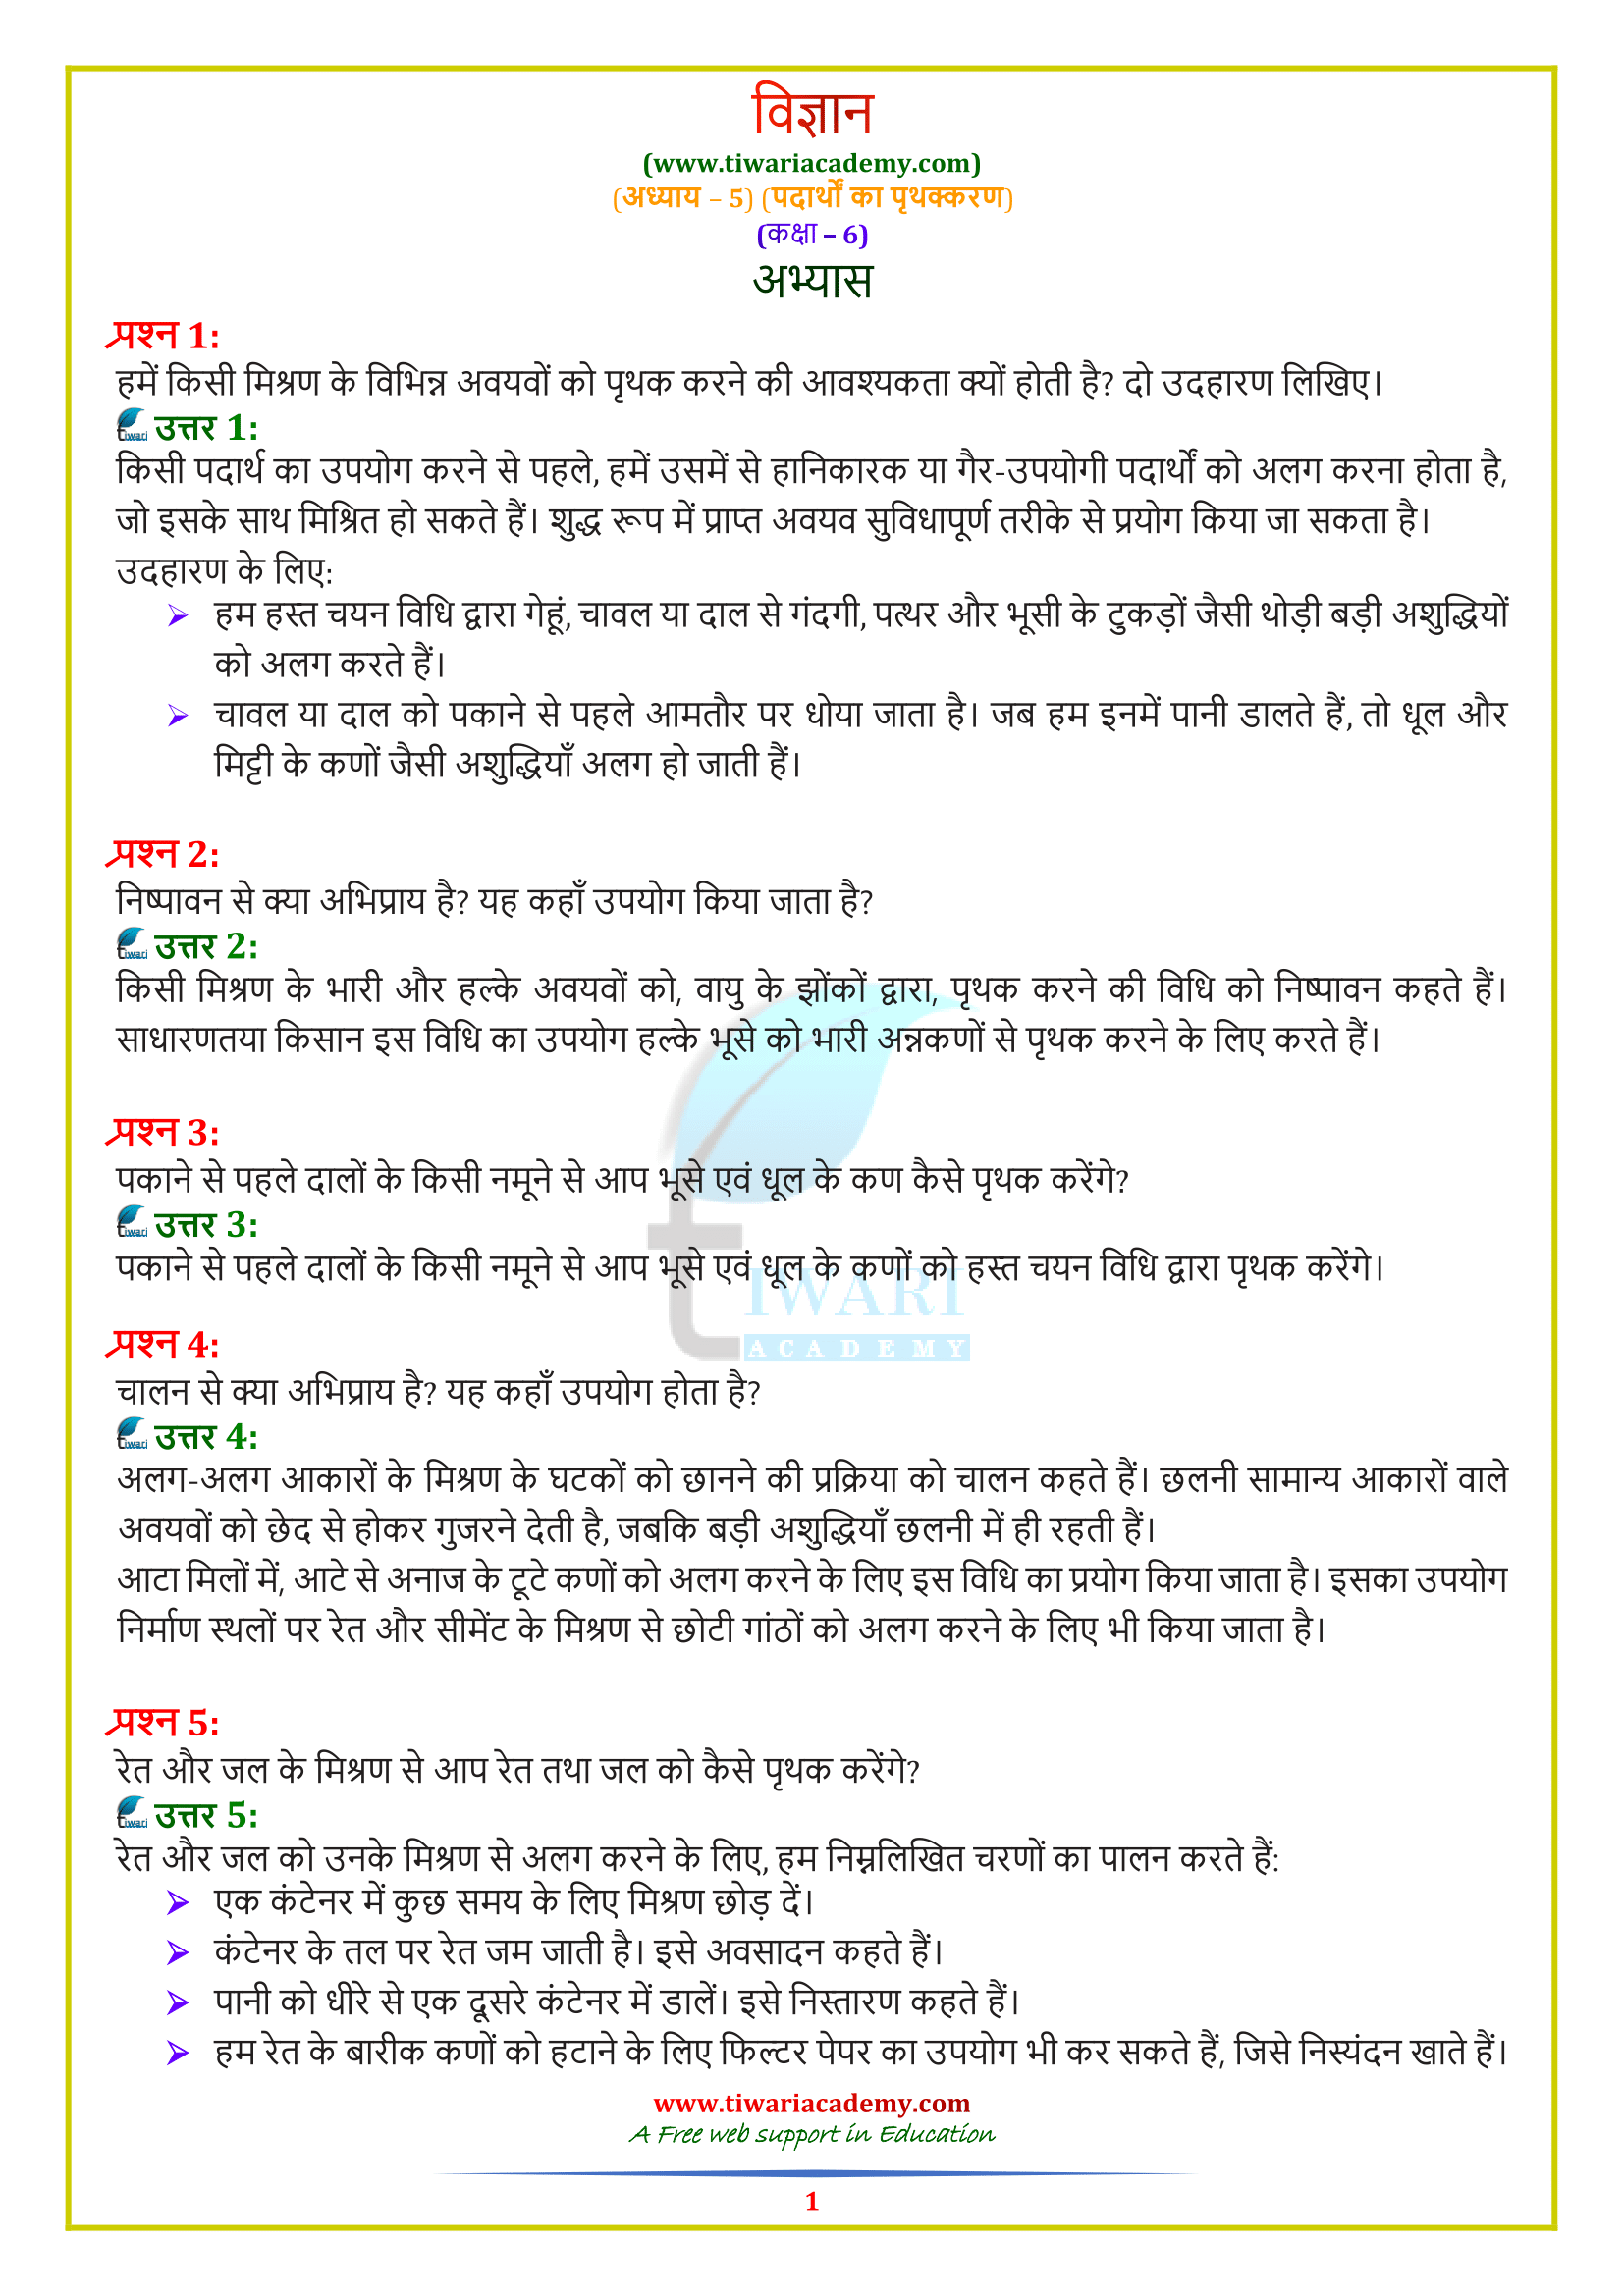 NCERT Solutions for Class 6 Science Chapter 5 in Hindi Medium